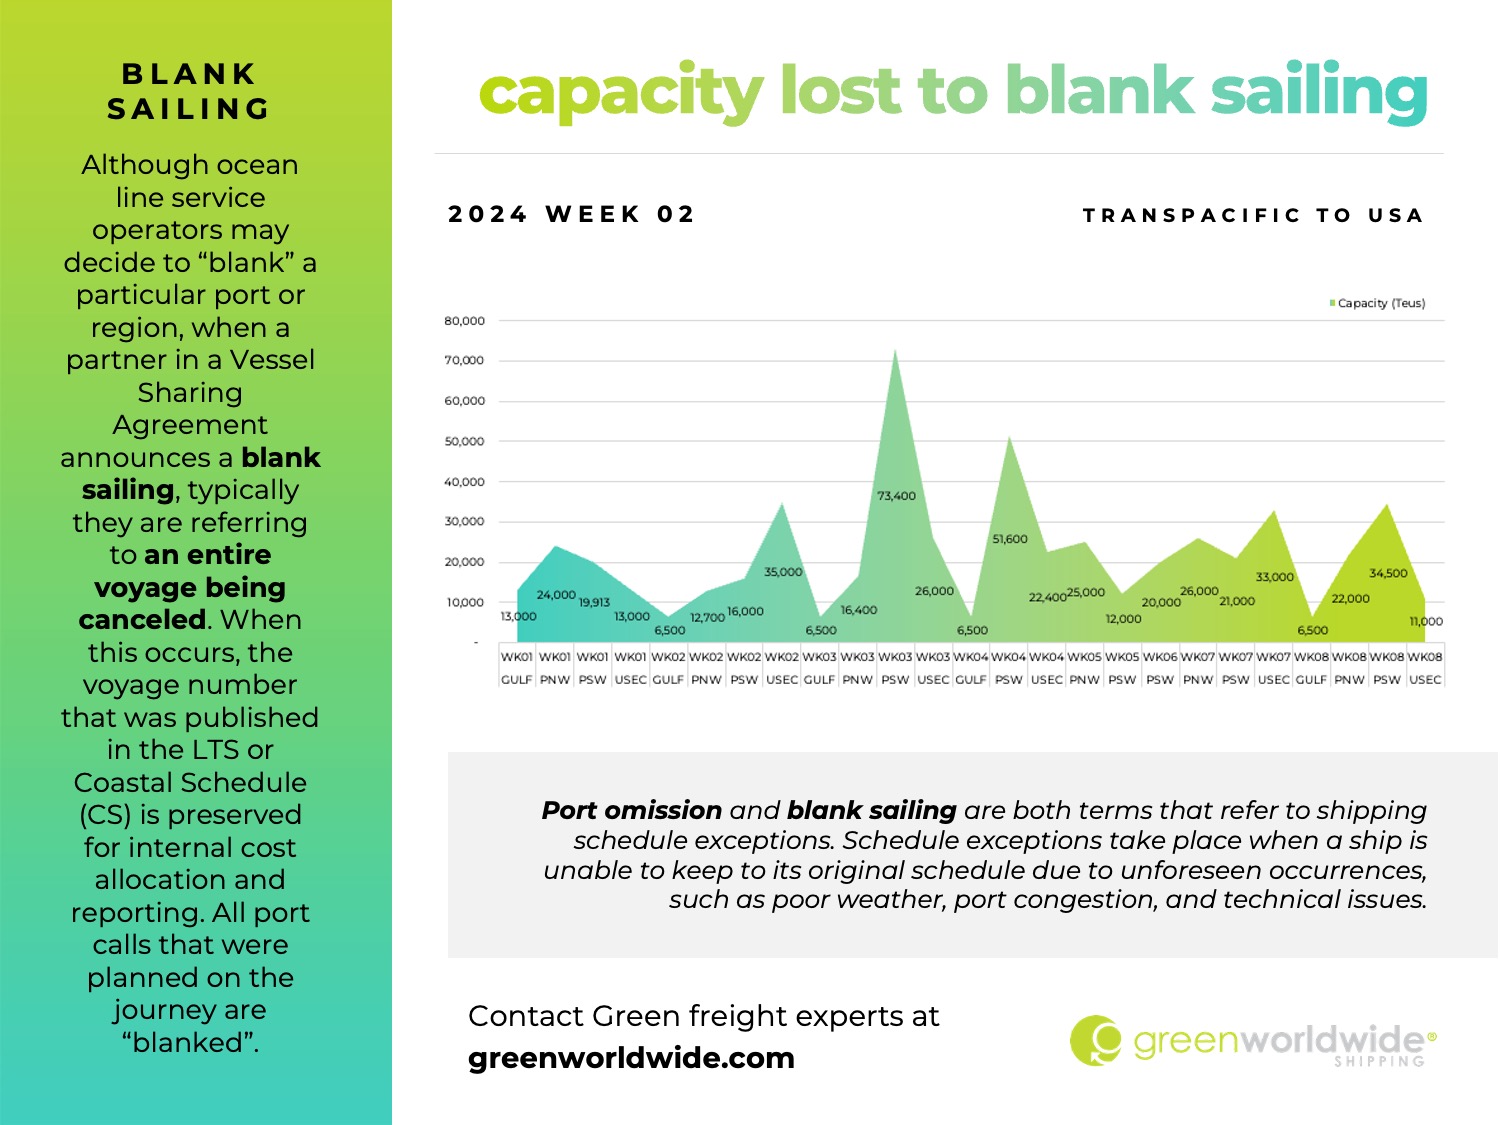 capacity lost to blank sailing 2024 WEEK 02 TRANSPACIFIC TO USA Port omission and blank sailing are both terms that refer to shipping schedule exceptions. Schedule exceptions take place when a ship is unable to keep to its original schedule due to unforeseen occurrences, such as poor weather, port congestion, and technical issues. BLANK SAILING Although ocean line service operators may decide to “blank” a particular port or region, when a partner in a Vessel Sharing Agreement announces a blank sailing, typically they are referring to an entire voyage being canceled. When this occurs, the voyage number that was published in the LTS or Coastal Schedule (CS) is preserved for internal cost allocation and reporting. All port calls that were planned on the journey are “blanked”. Contact Green freight experts atgreenworldwide.com